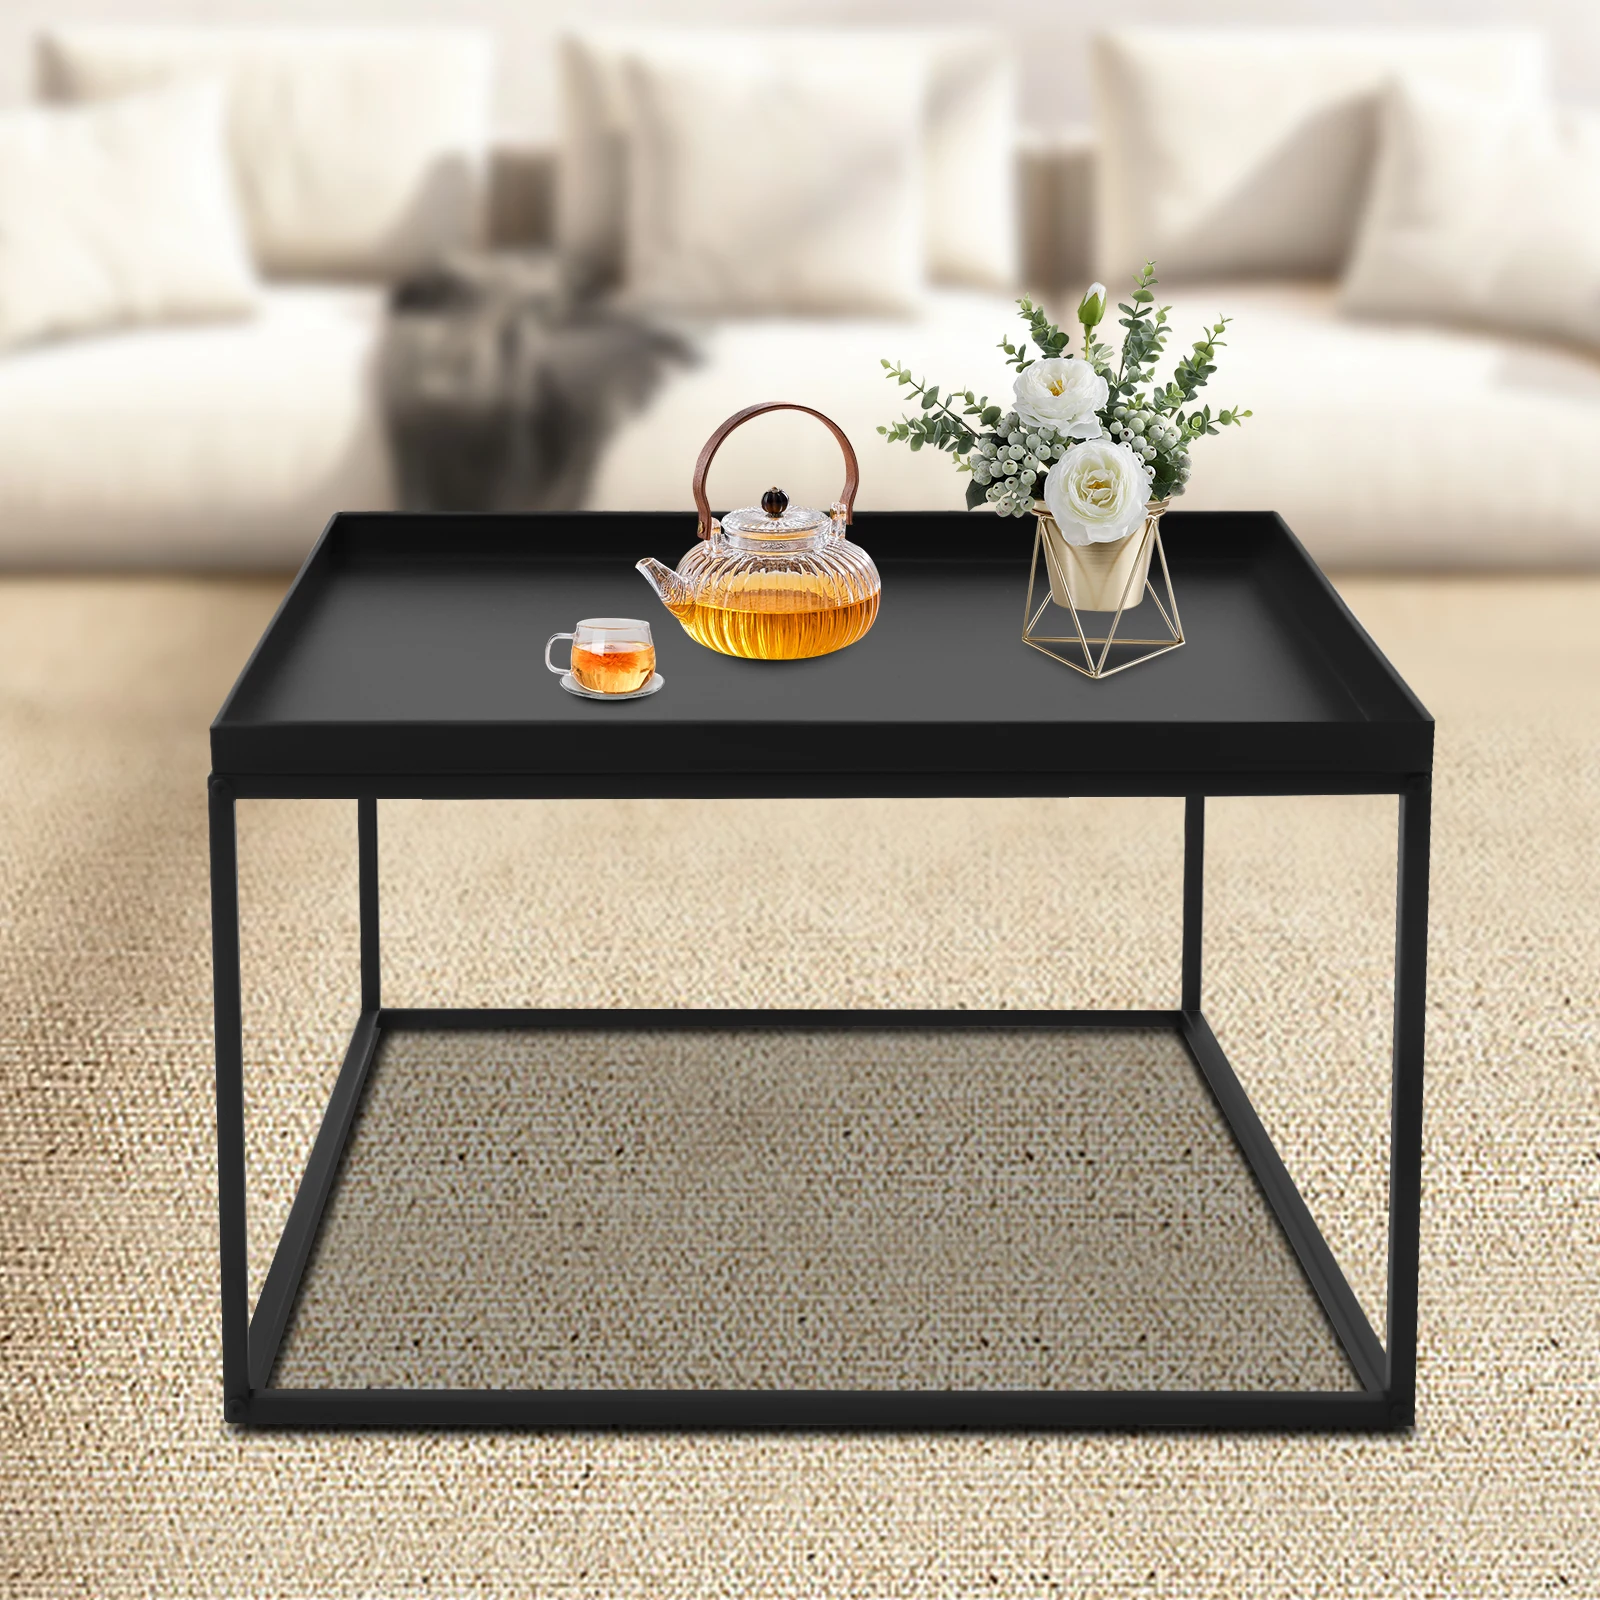 

59cm Modern Metal Square Coffee Table Matt Black End Table Side Table Display Stand Fit Office Home Put Book Plant And Fruit